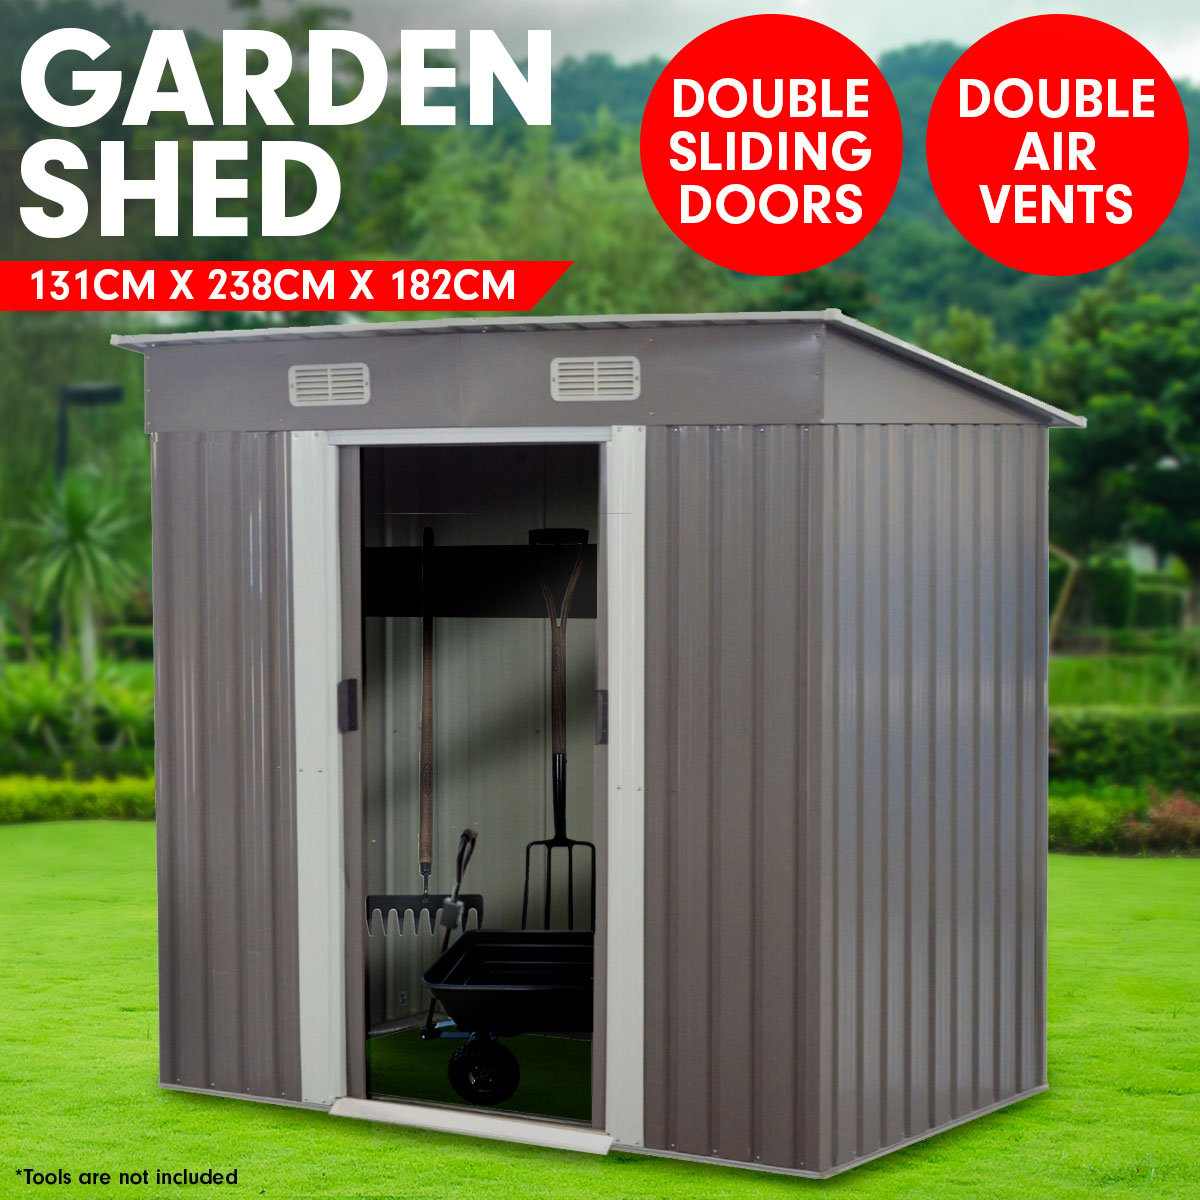 4ft x 8ft Garden Shed Flat Roof Outdoor Storage - Grey 1